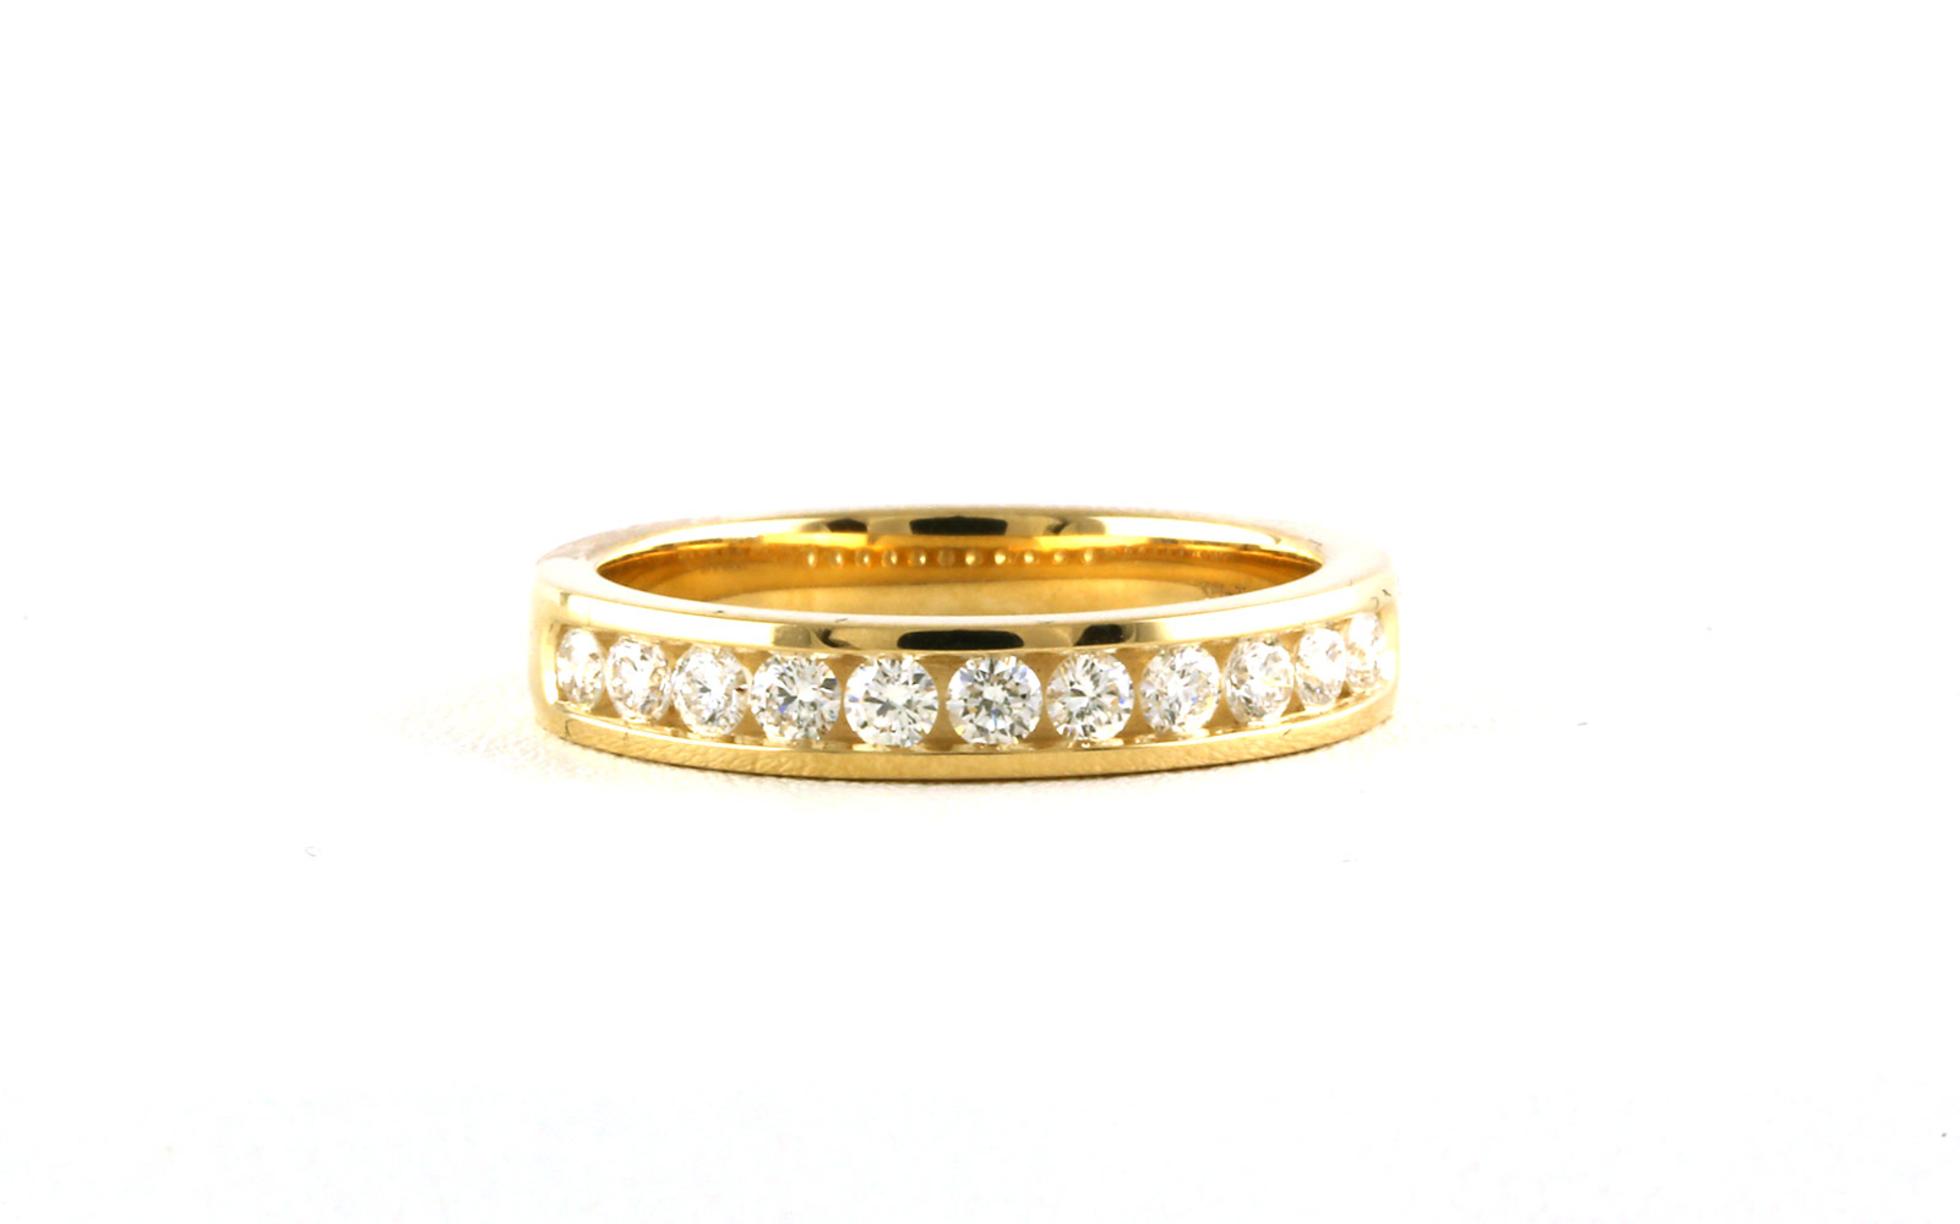 11-Stone Channel-set Wedding Band with Diamonds in Yellow Gold (0.50cts TWT)